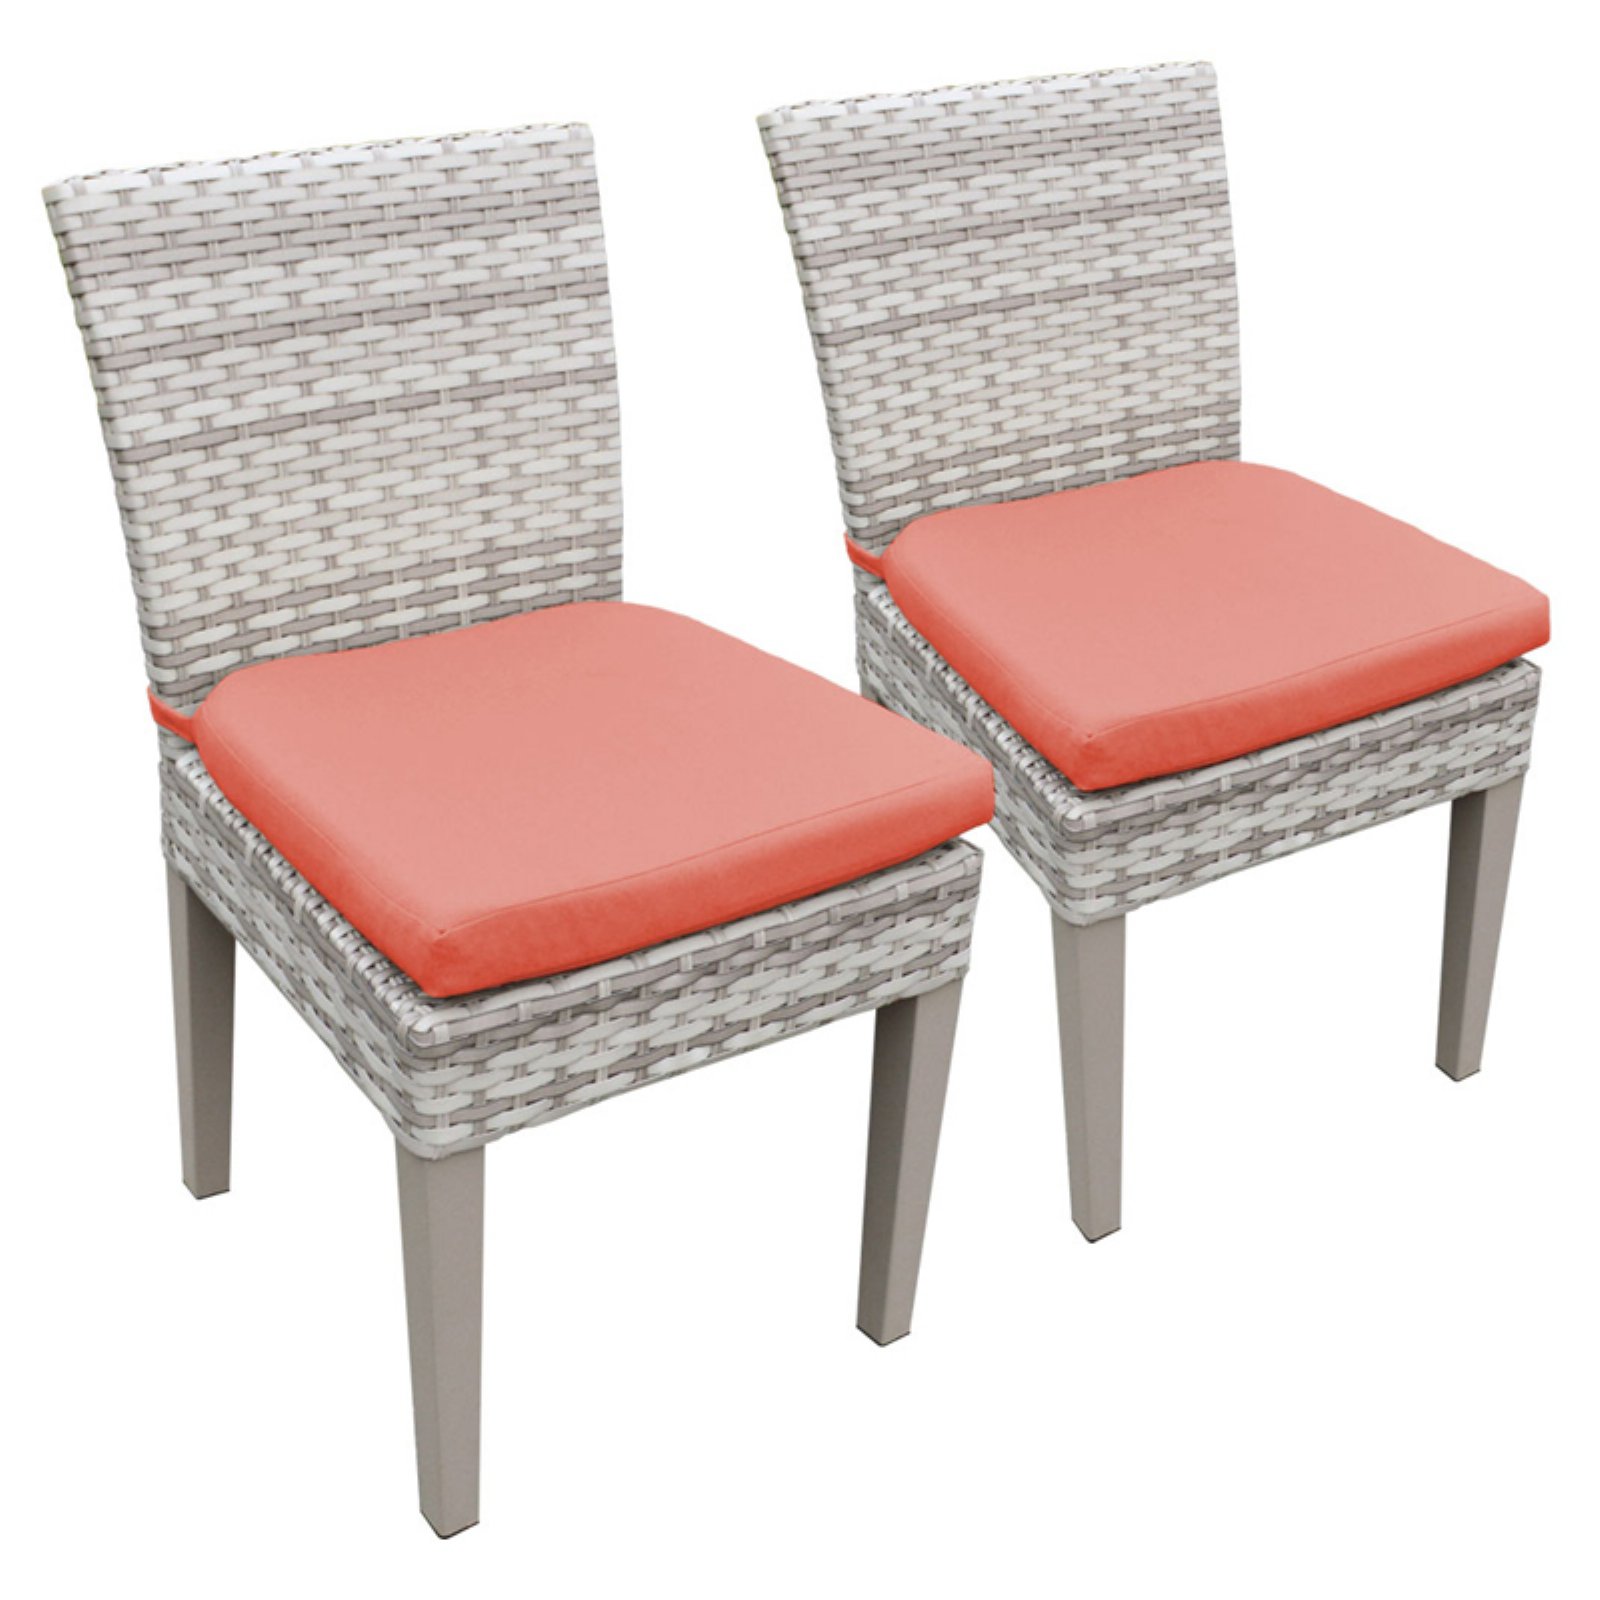 4 Fairmont Armless Dining Chairs-Color:Tangerine - image 1 of 2